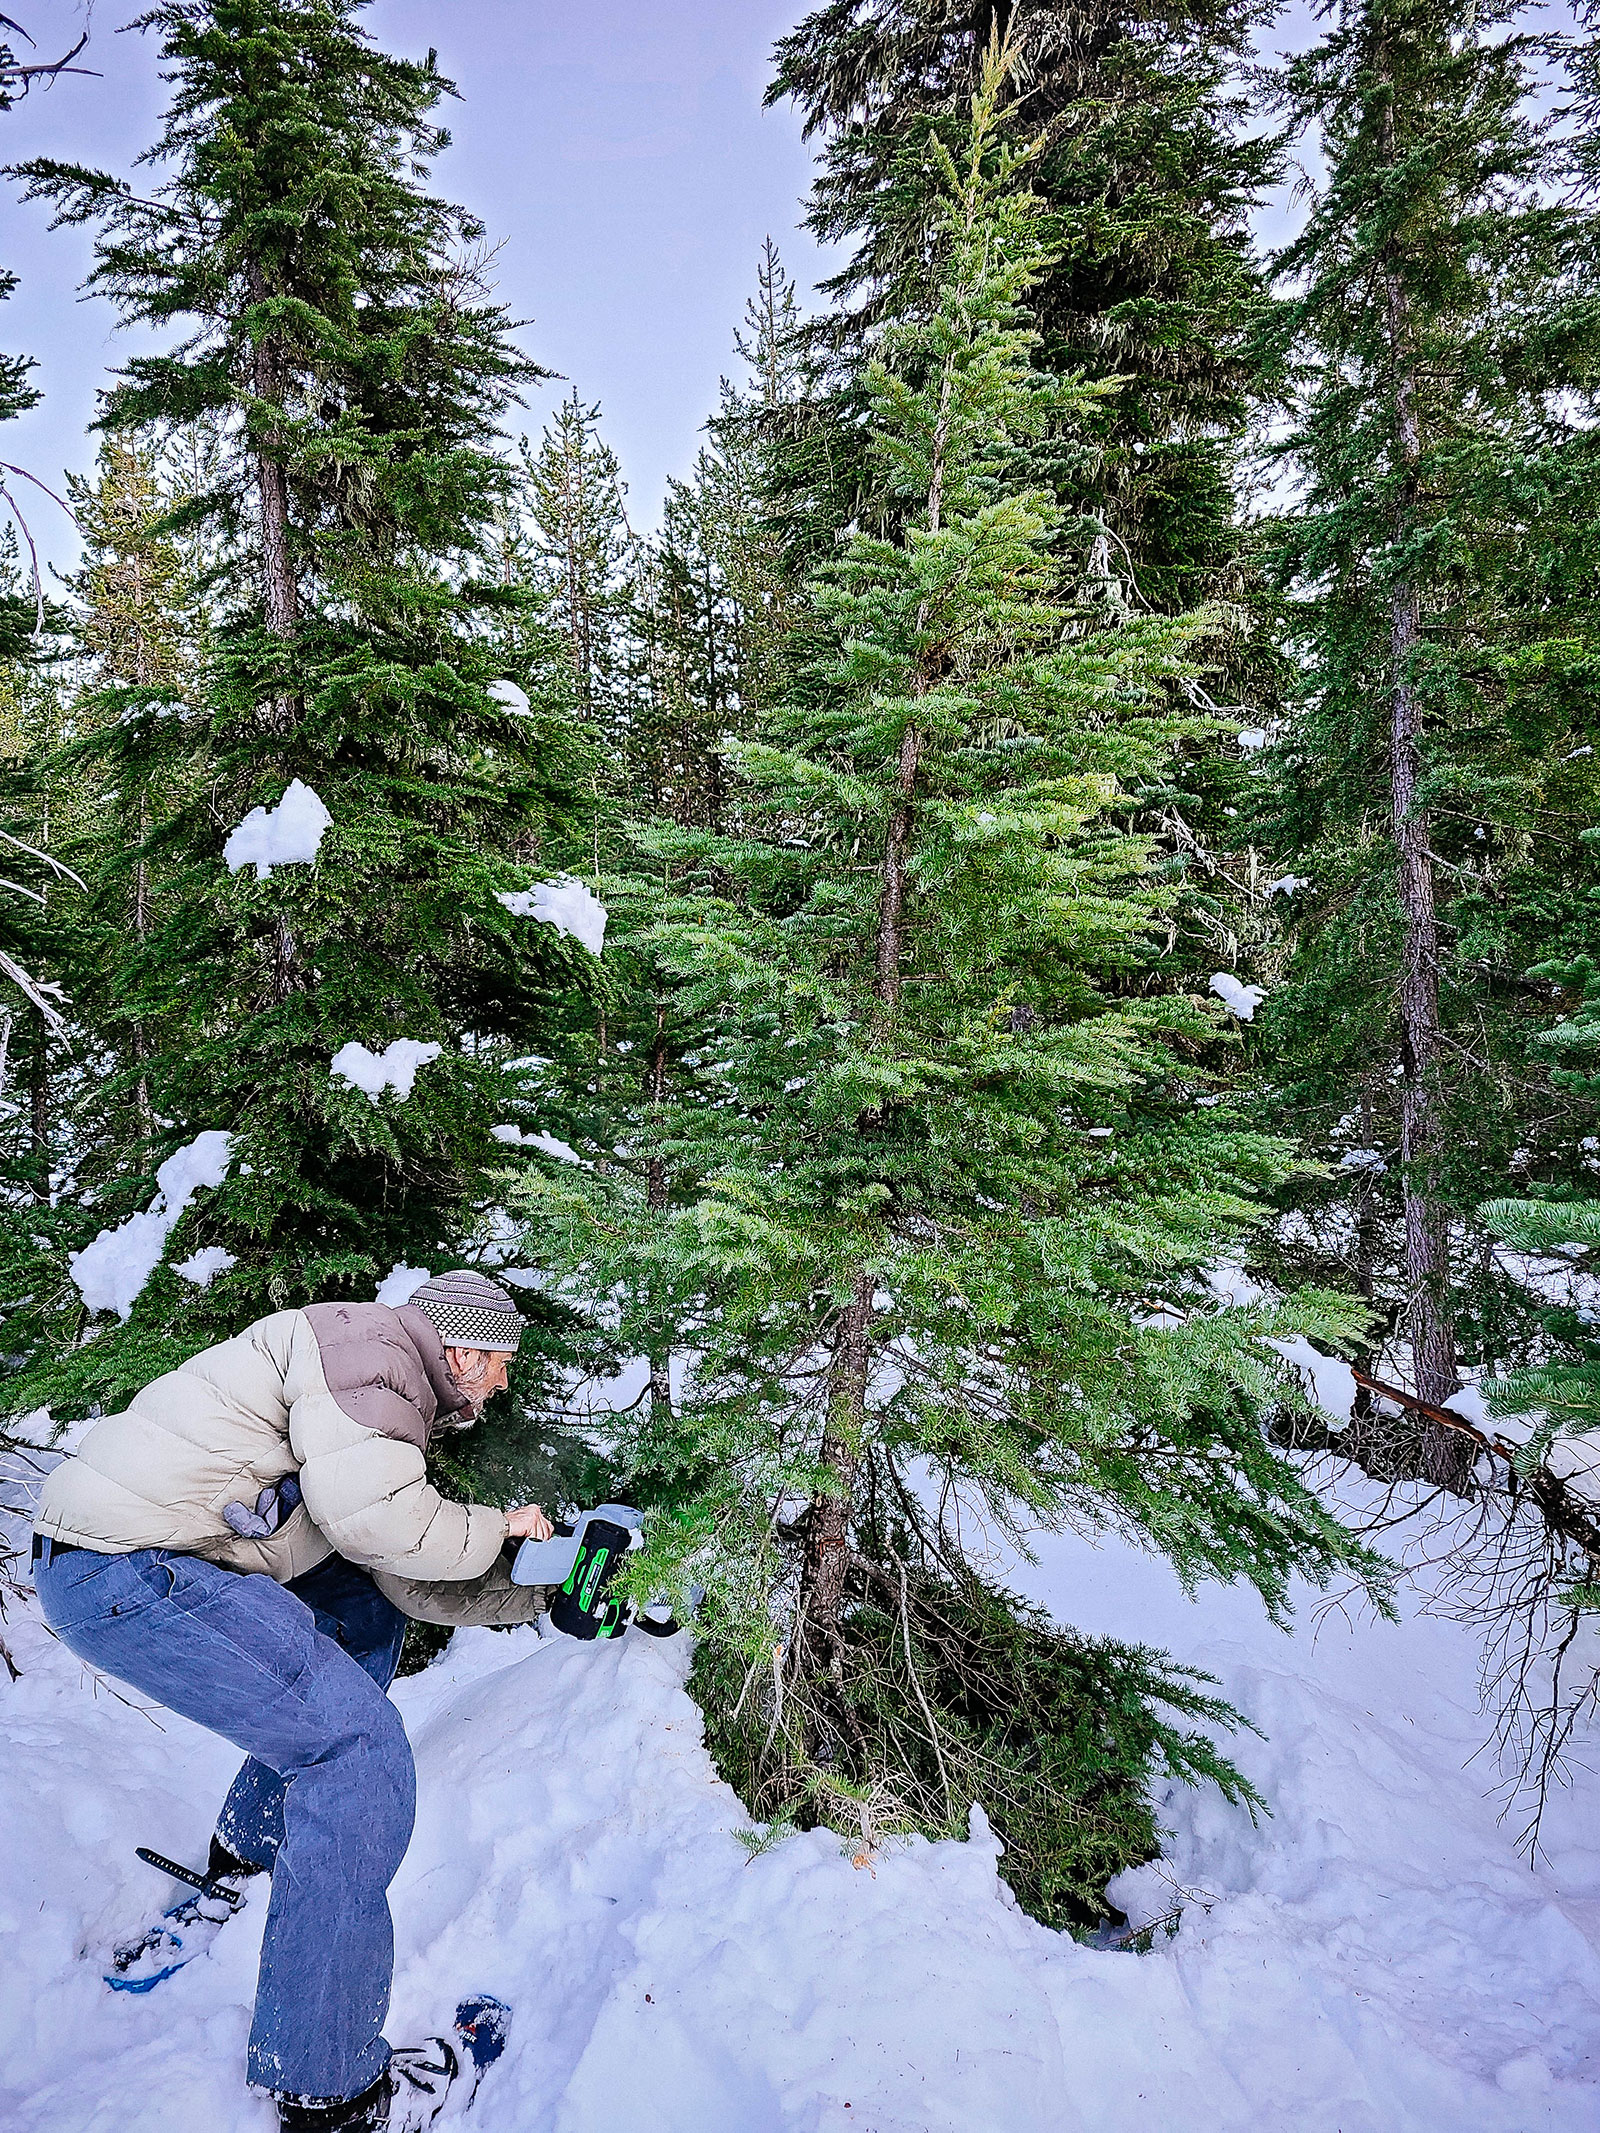 Man wearing snowshoes and cutting down a tree with a chainsaw in the forest